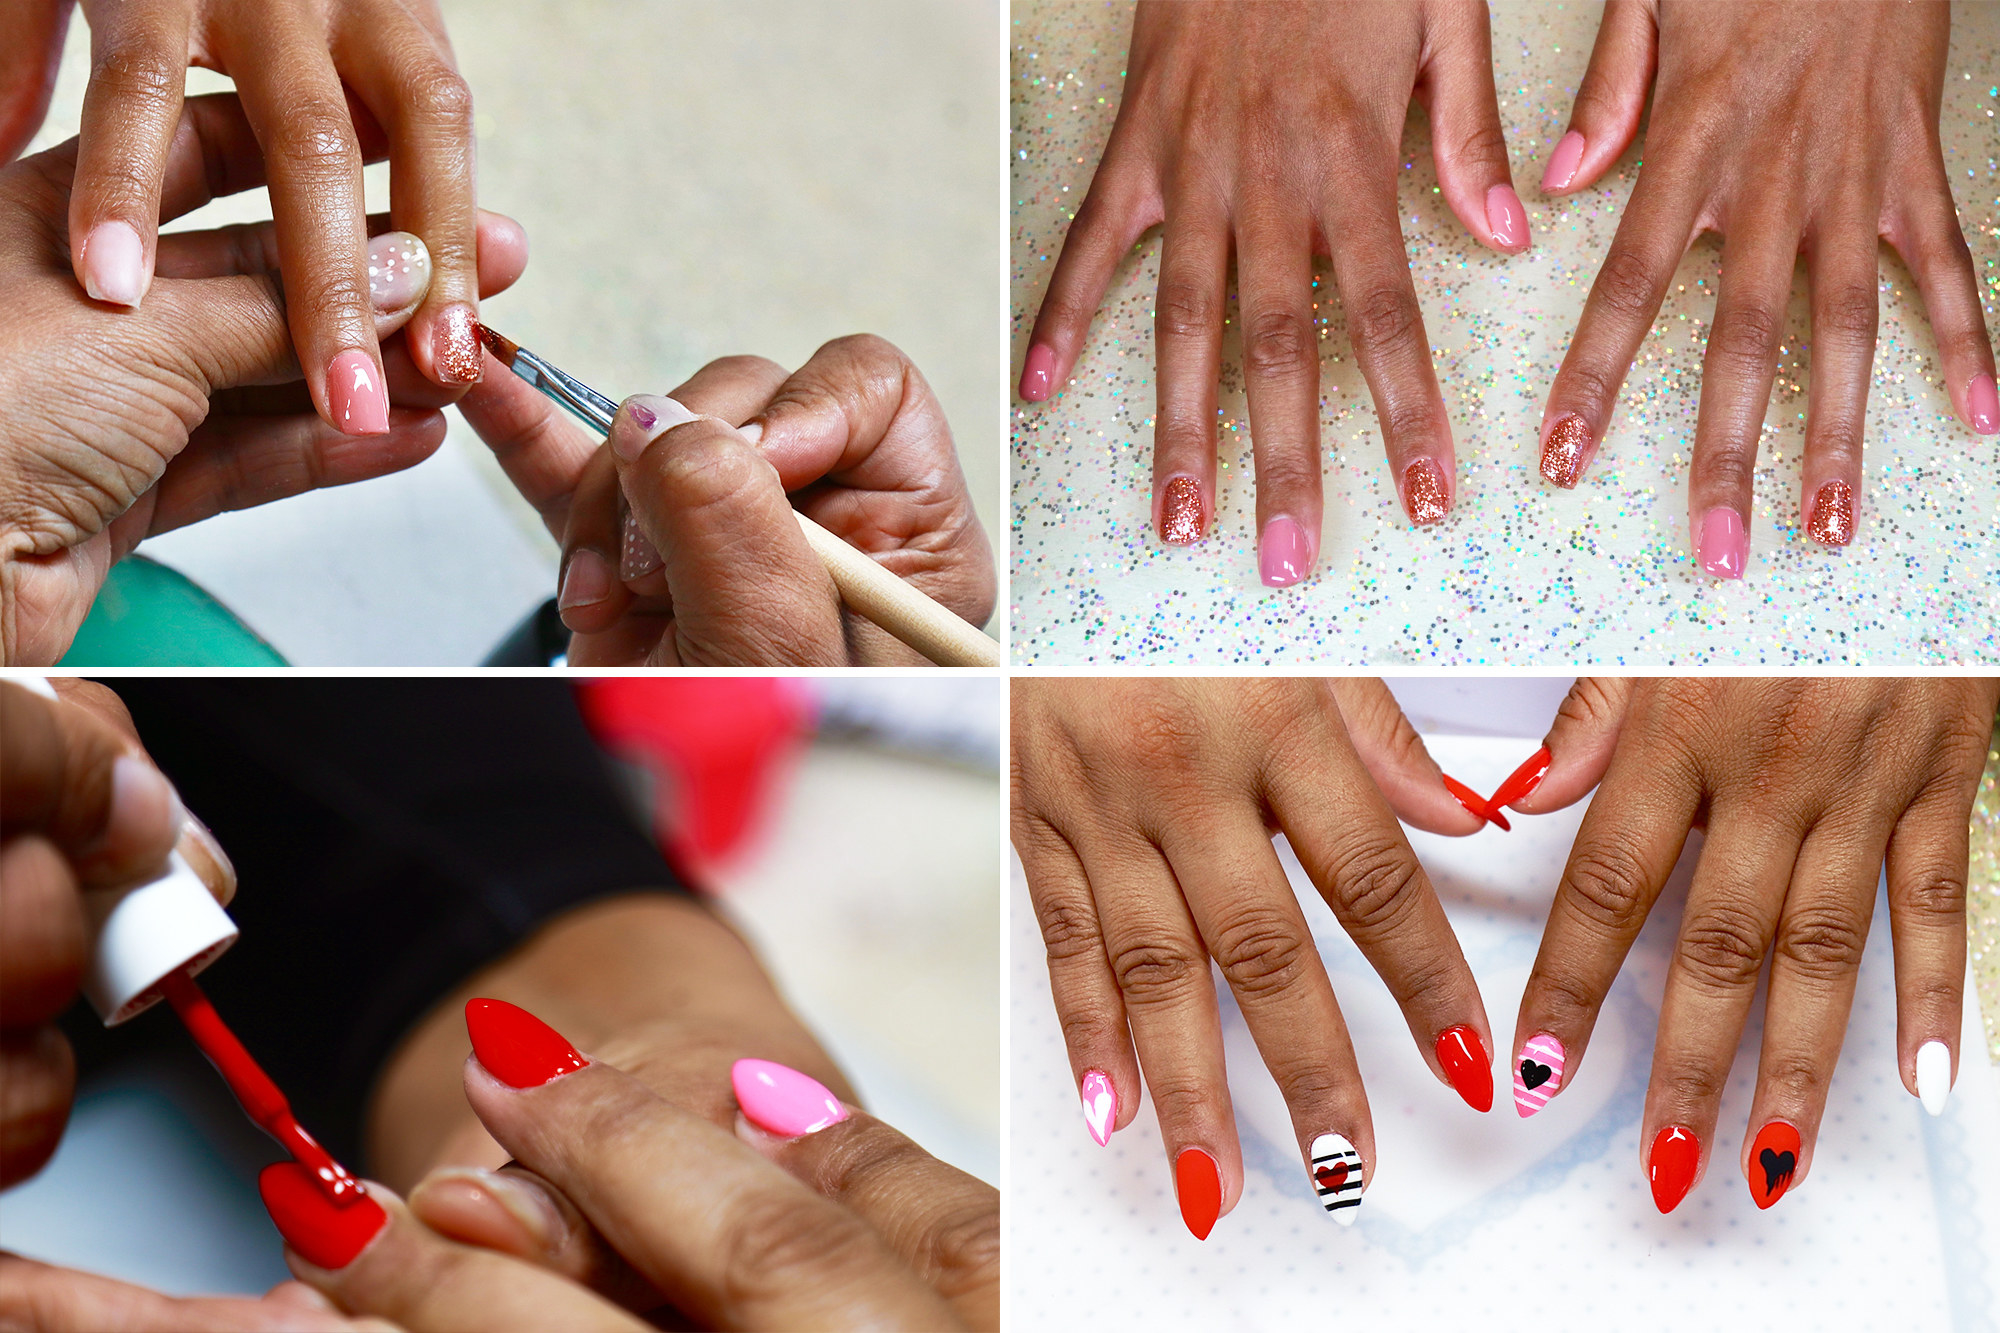 Got a bad #nail job at another #salon? Let #Images redo your nails for  #free! For more details, visit imagesnaillounge.com/happiernails  #happiernails #nailart #…